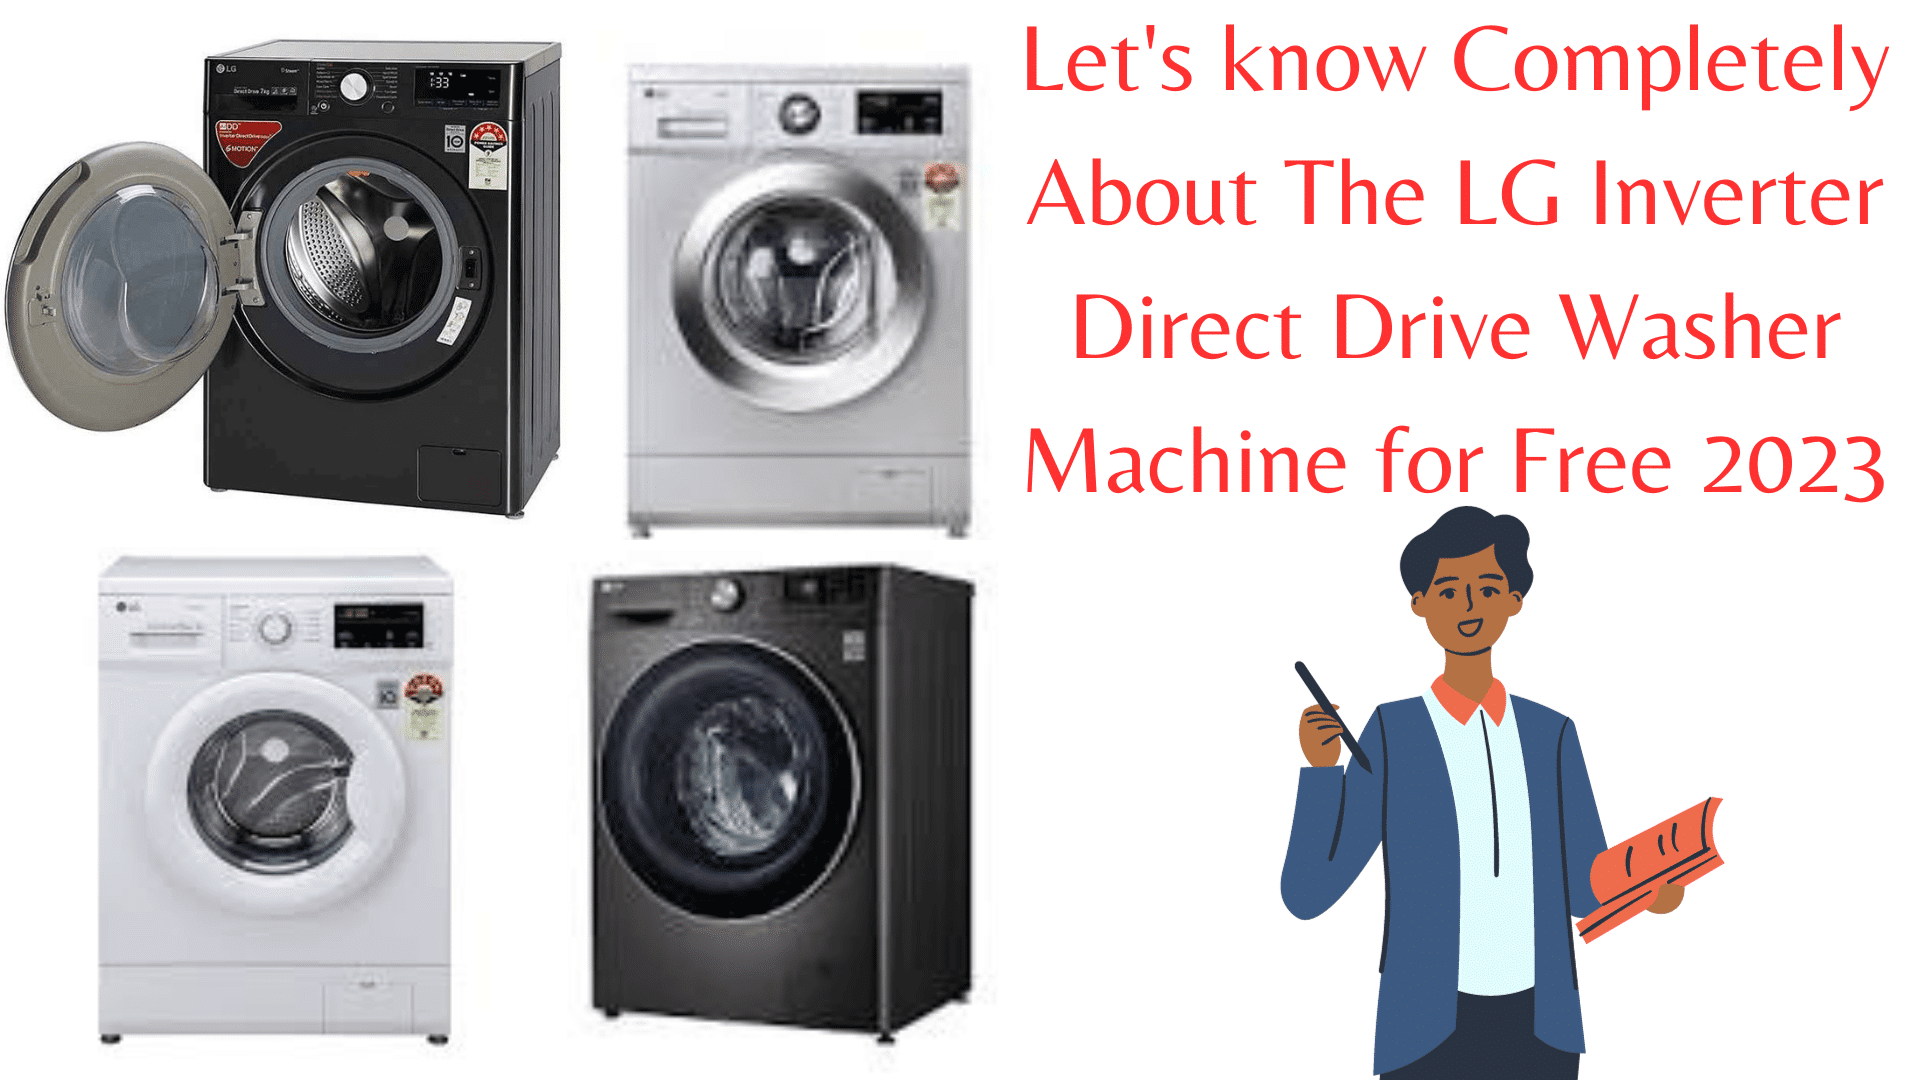 Let's know Completely About The LG Inverter Direct Drive Washer Machine for Free 2023